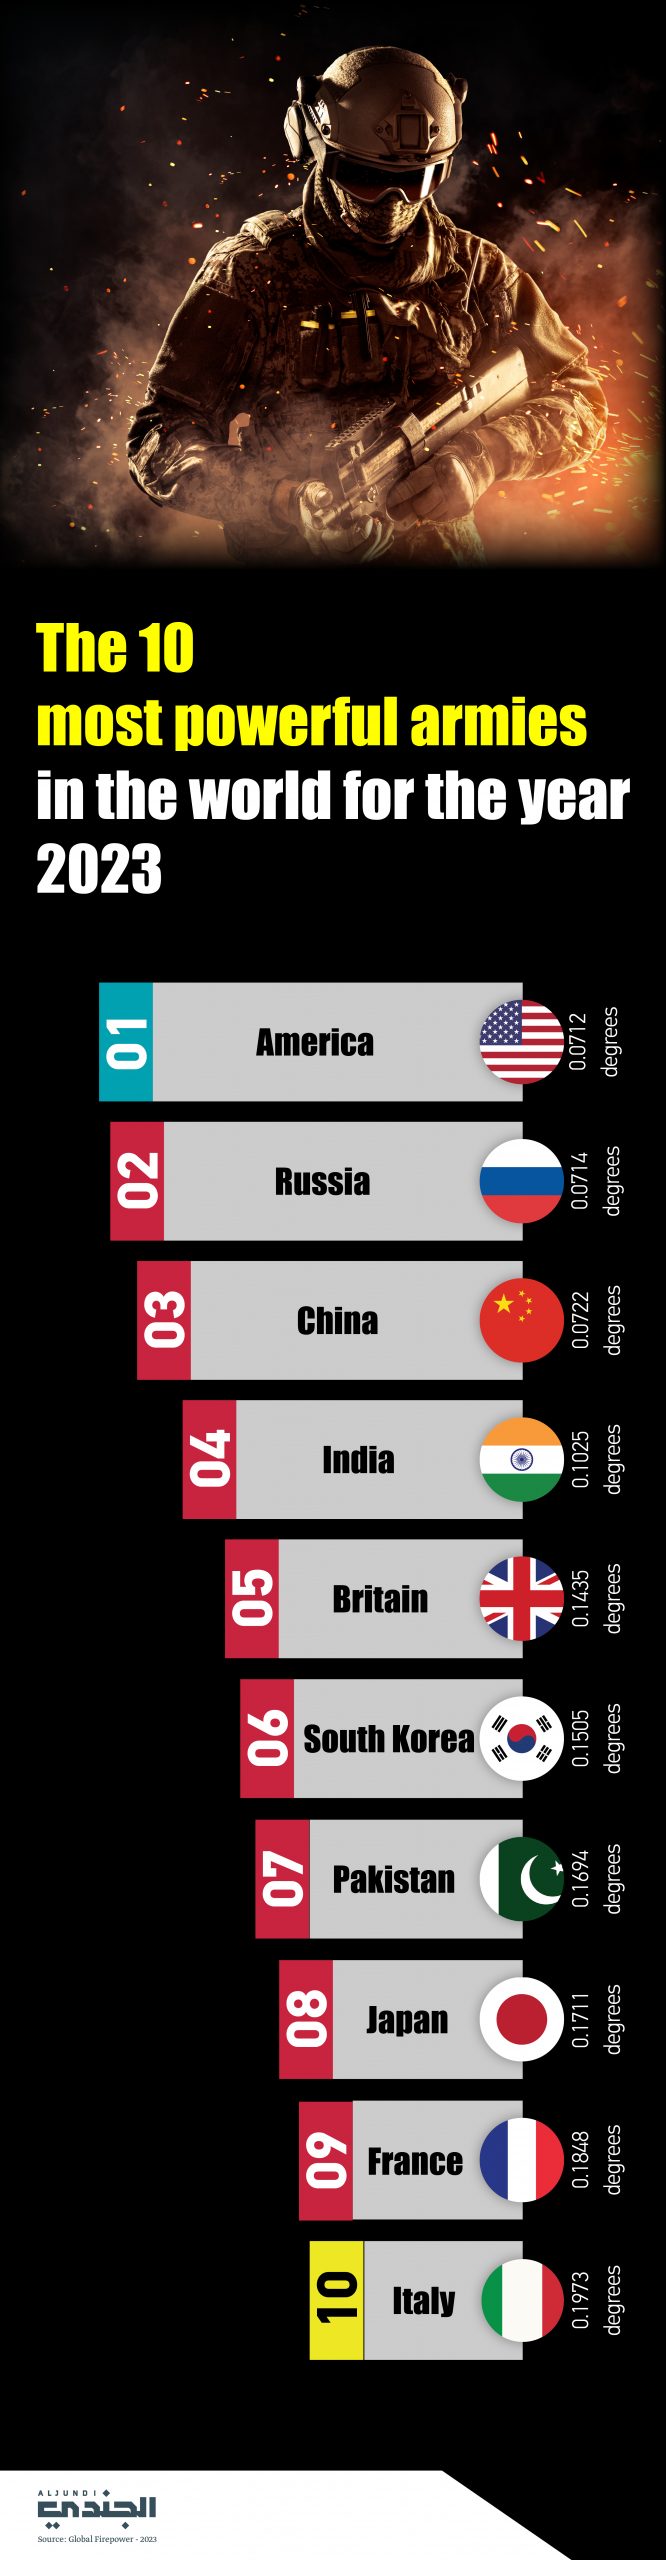 The World's Most Powerful Militaries